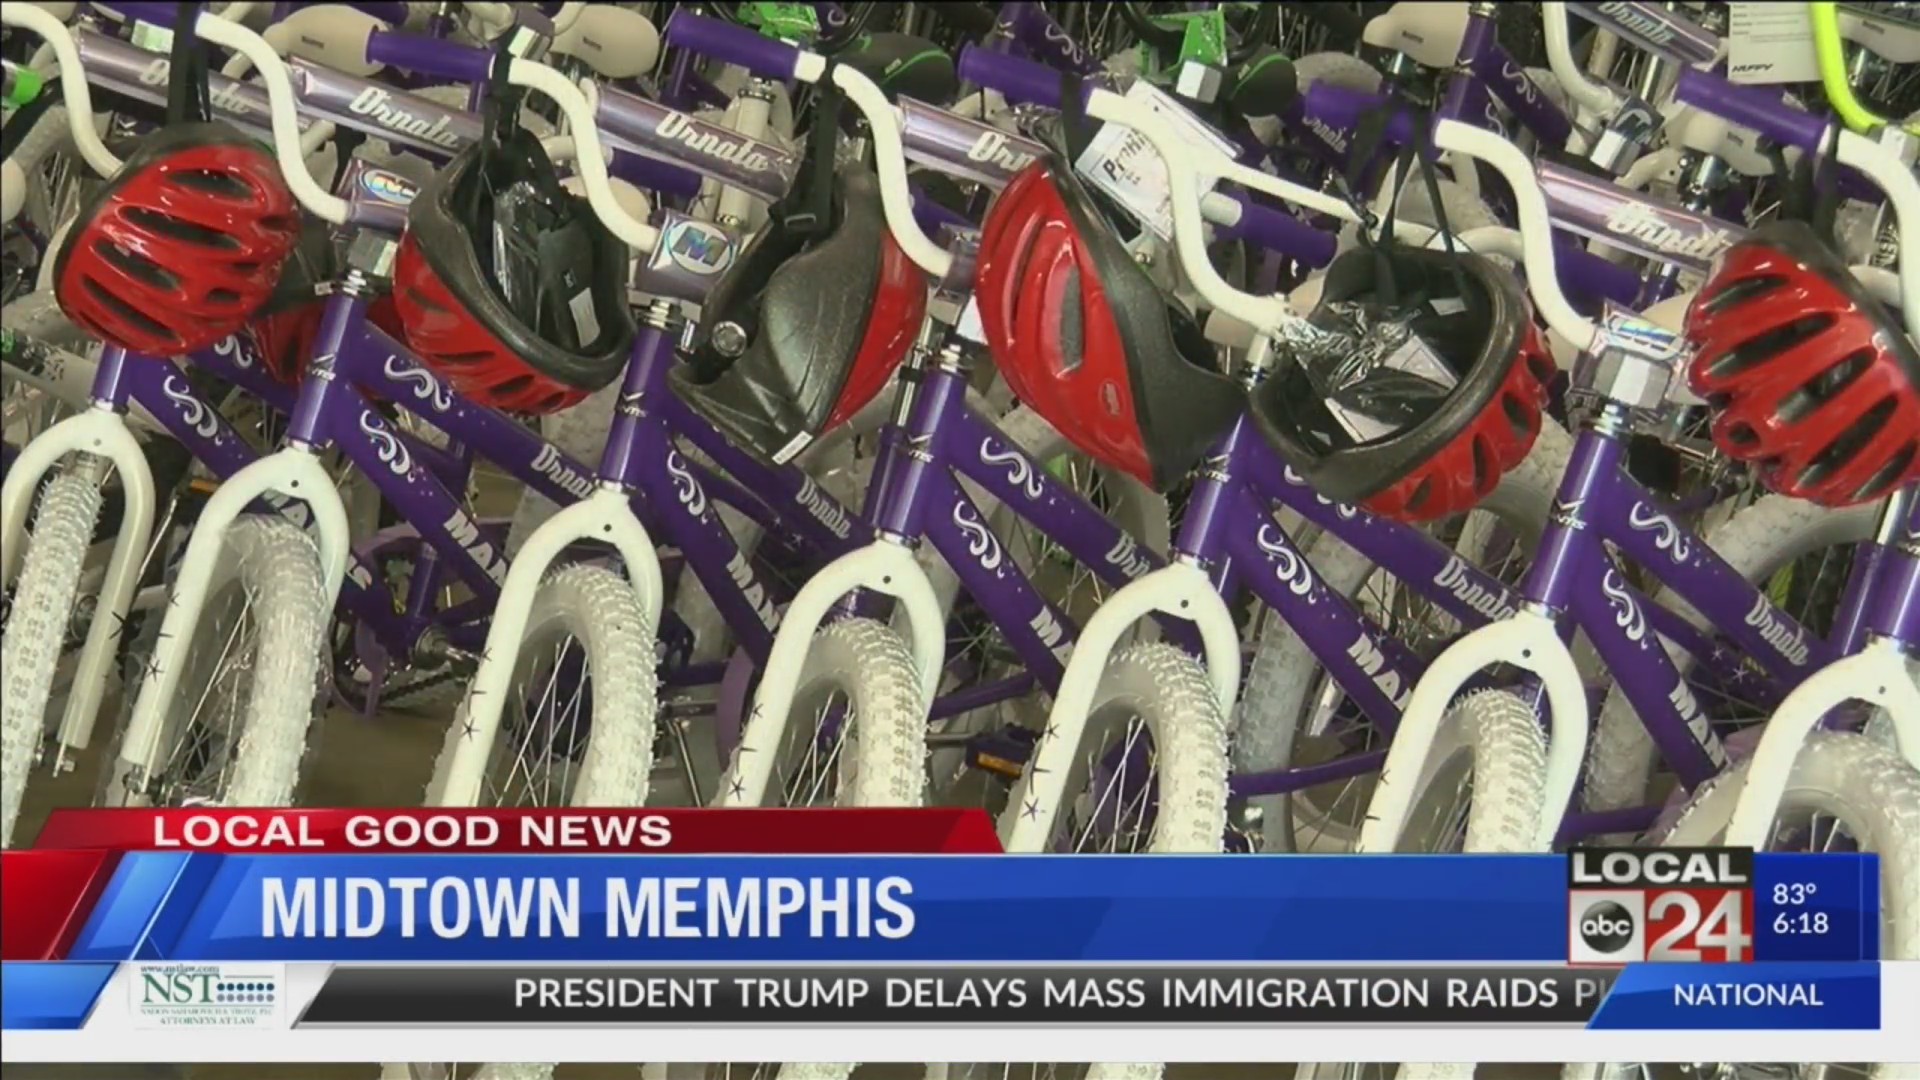 Bike Giveaway for students with perfect attendance